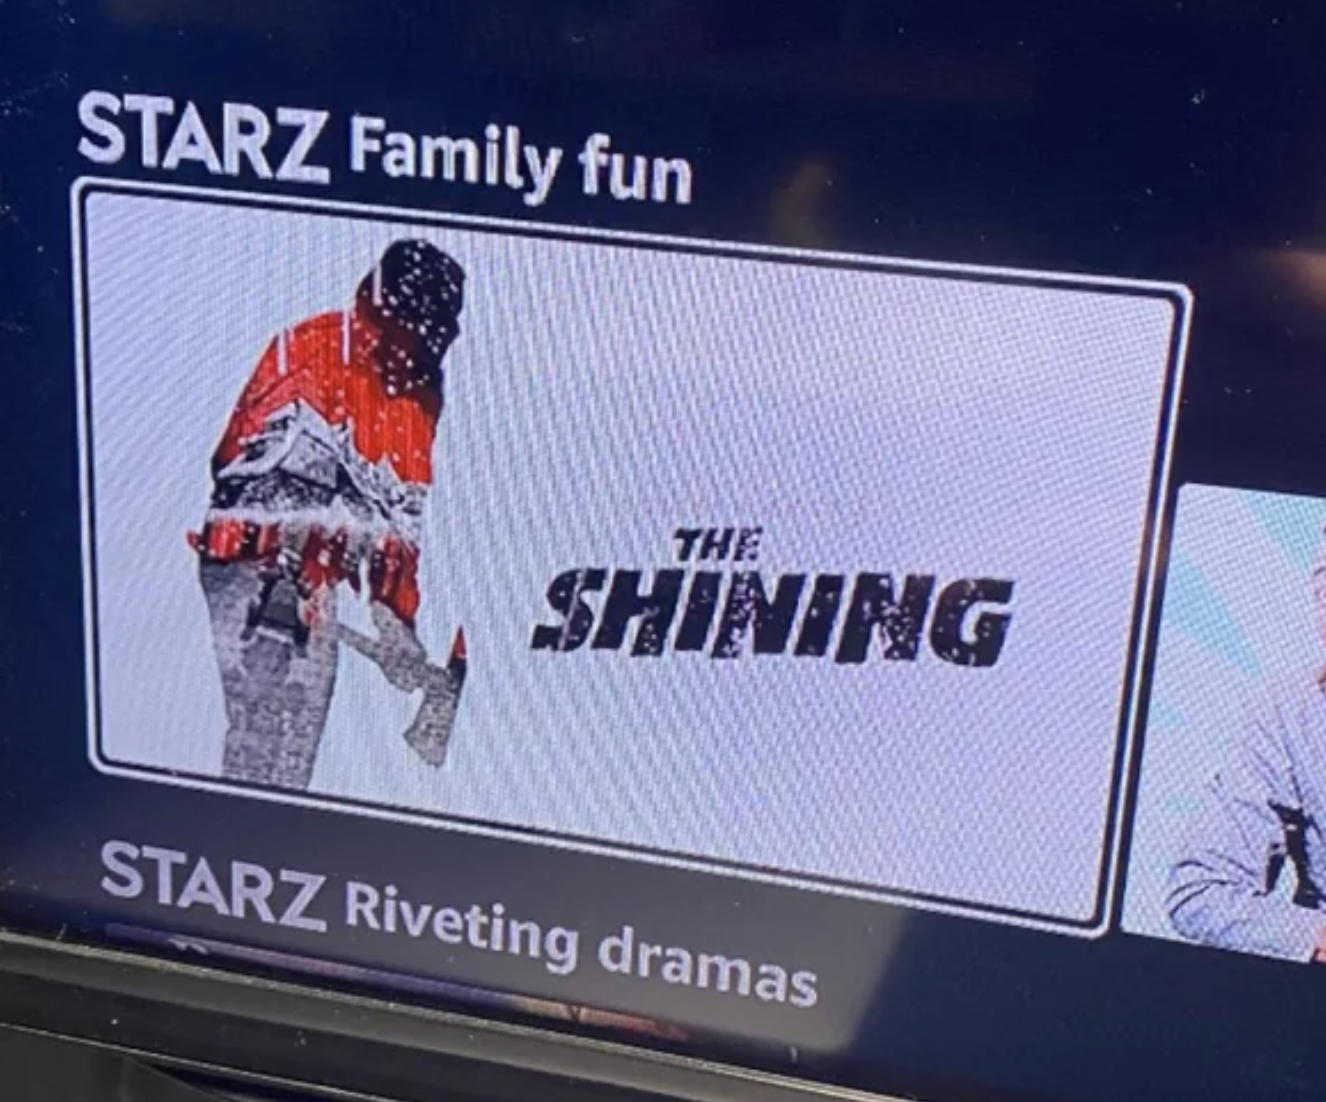 People Who Didn't Do Their Only Job - fun The Shining Starz Riveting dramas